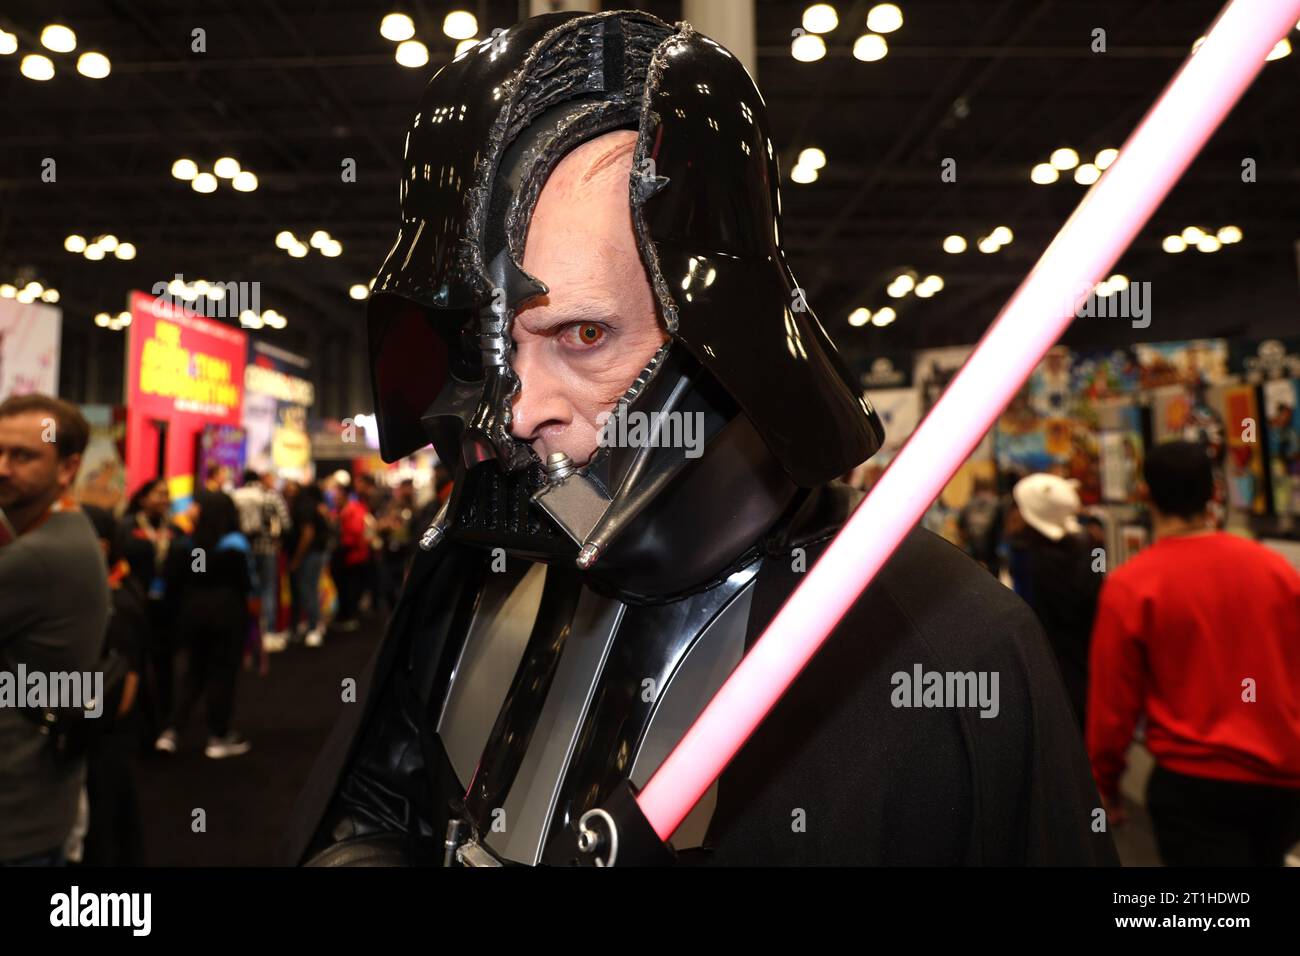 A cosplayer dressed as Darth Vader revealing Anakin Skywalker from ''Star Wars'' attends New York Comic Con 2023 at the Jacob Javits Center on October 13, 2023 in New York City. (Photo: Gordon Donovan) (Photo by Gordon Donovan/NurPhoto) Credit: NurPhoto SRL/Alamy Live News Stock Photo